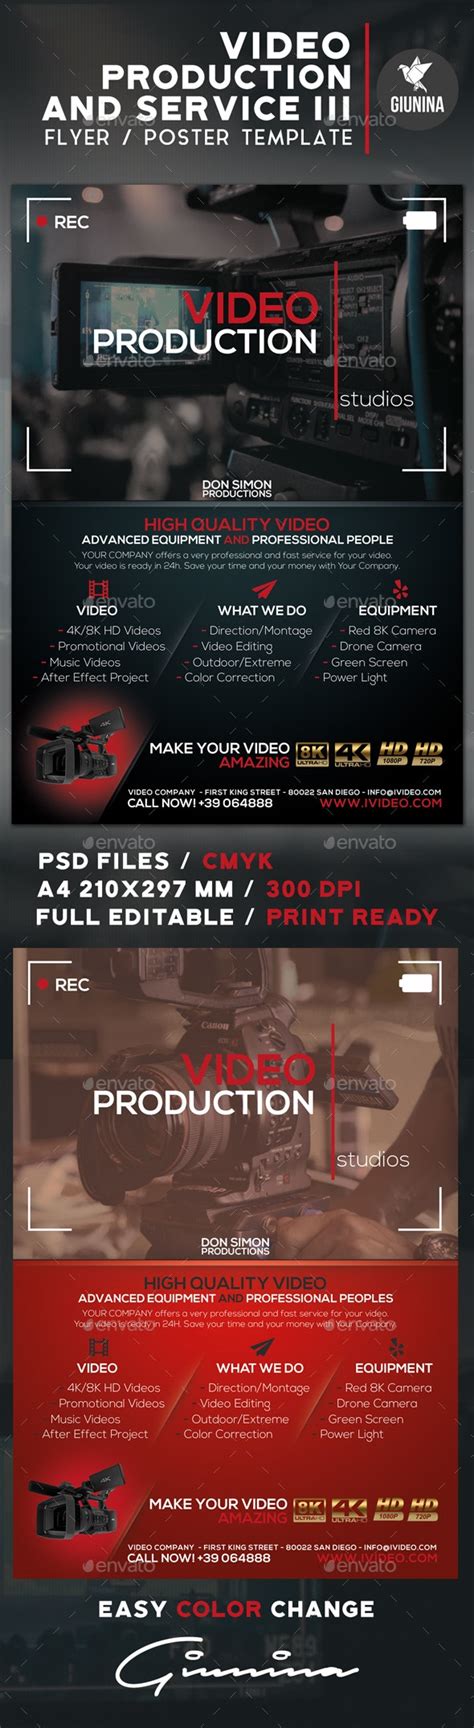 Video Production And Services 3 Flyerposter Print Templates